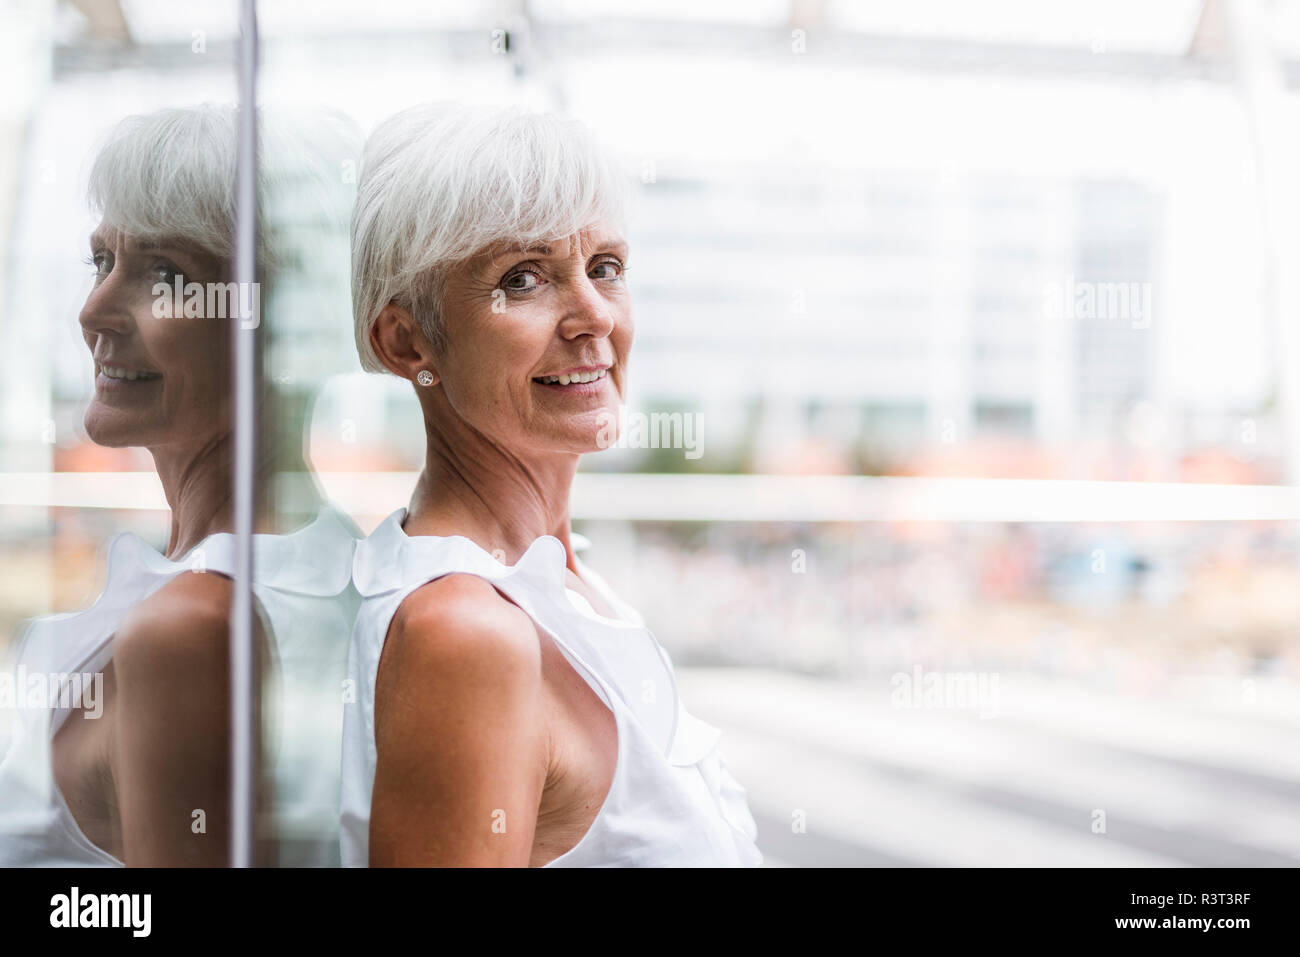 Portrait of smiling senior woman leaning against glass facade Stock Photo